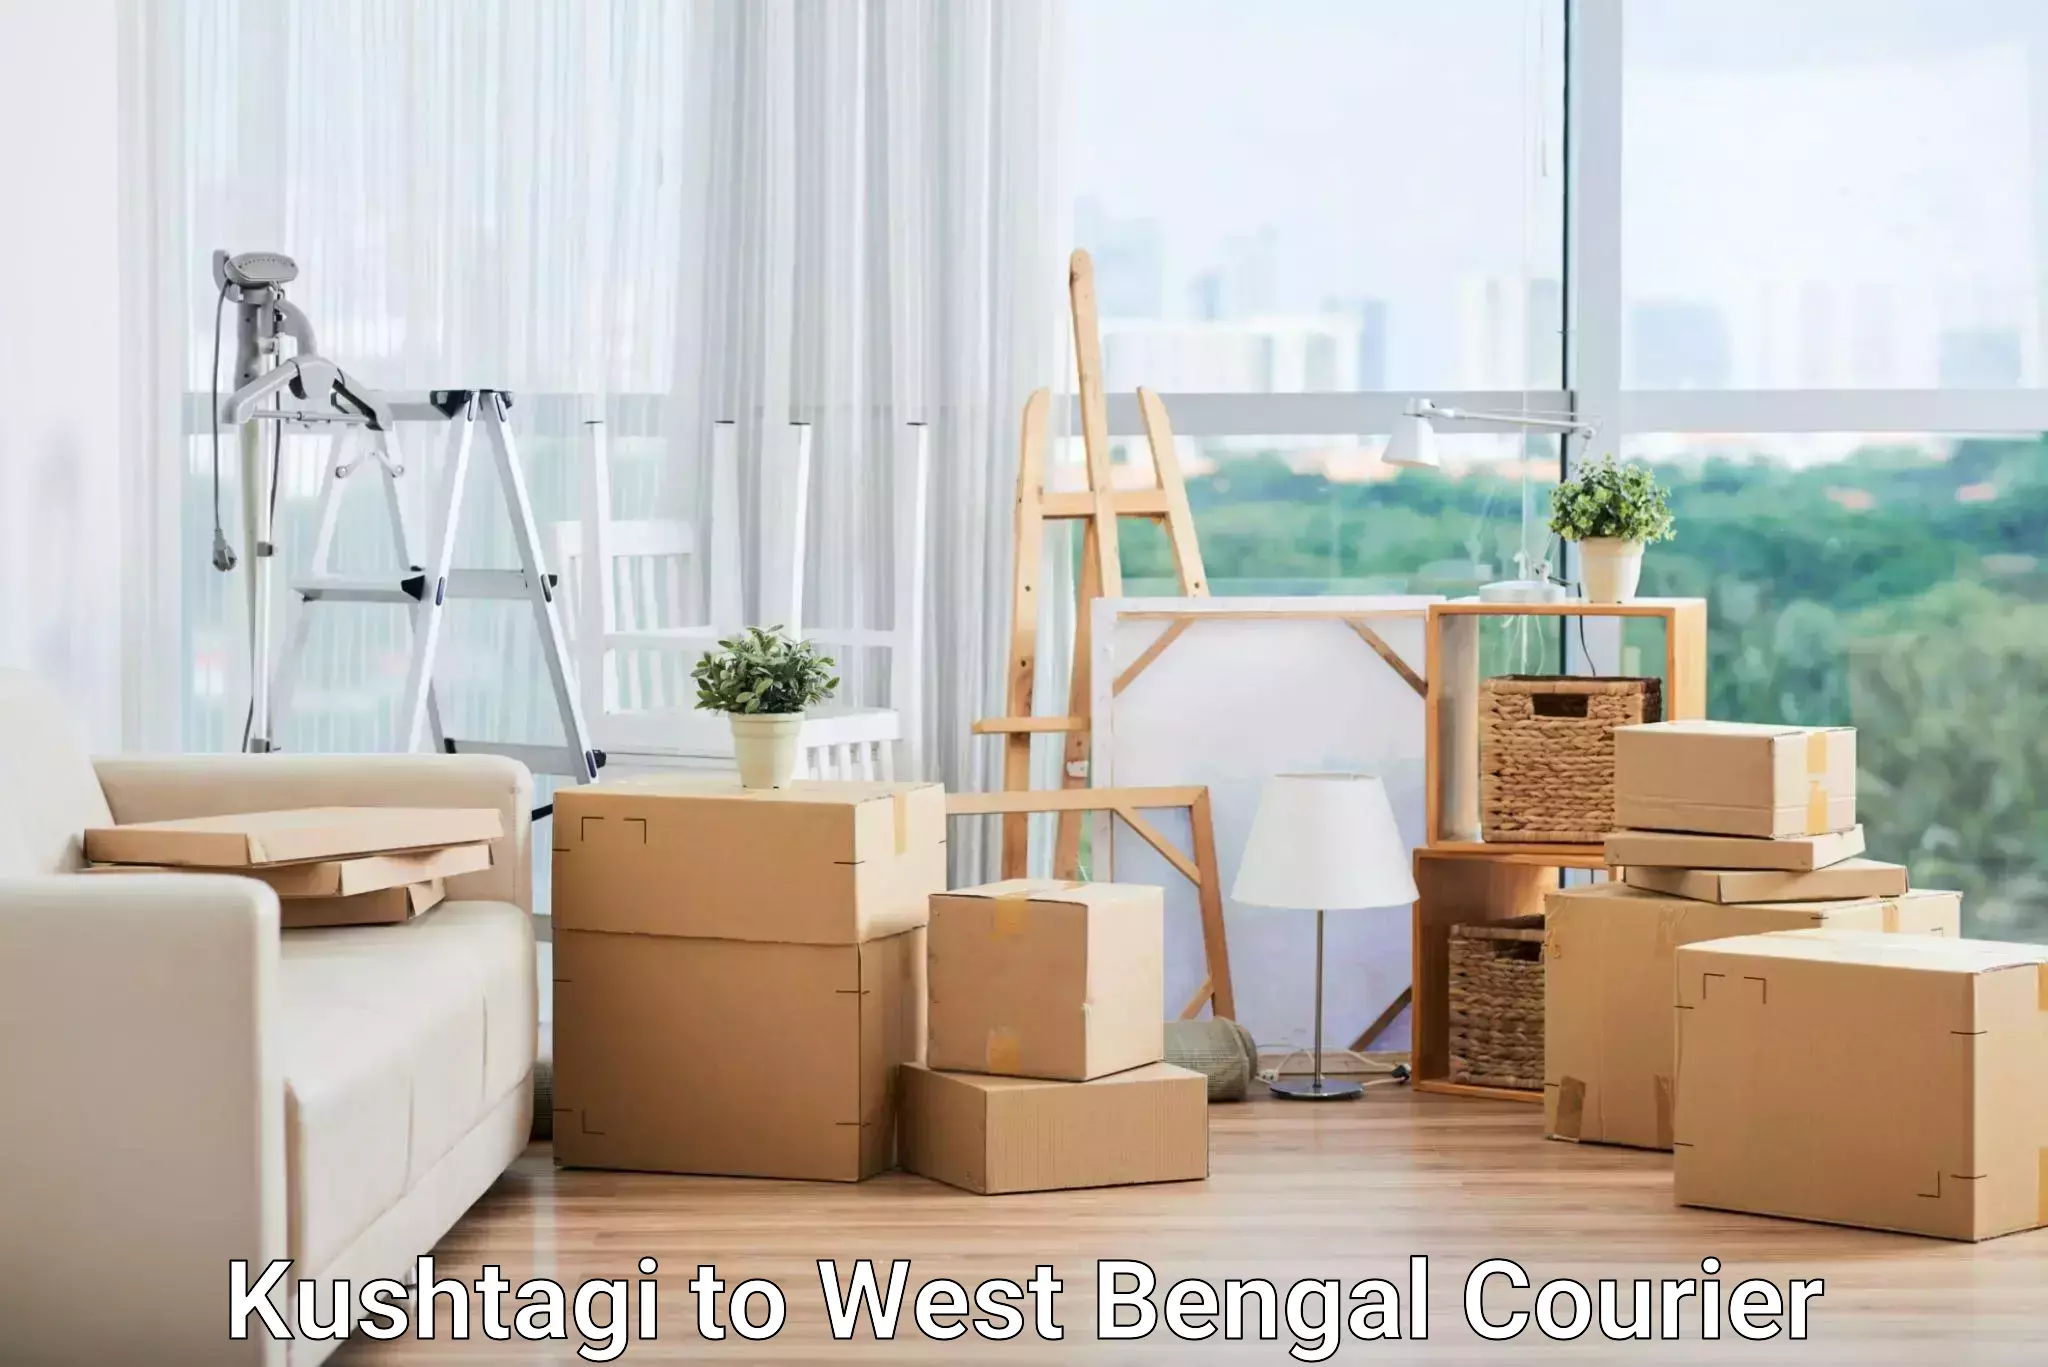 Fast delivery service Kushtagi to West Bengal